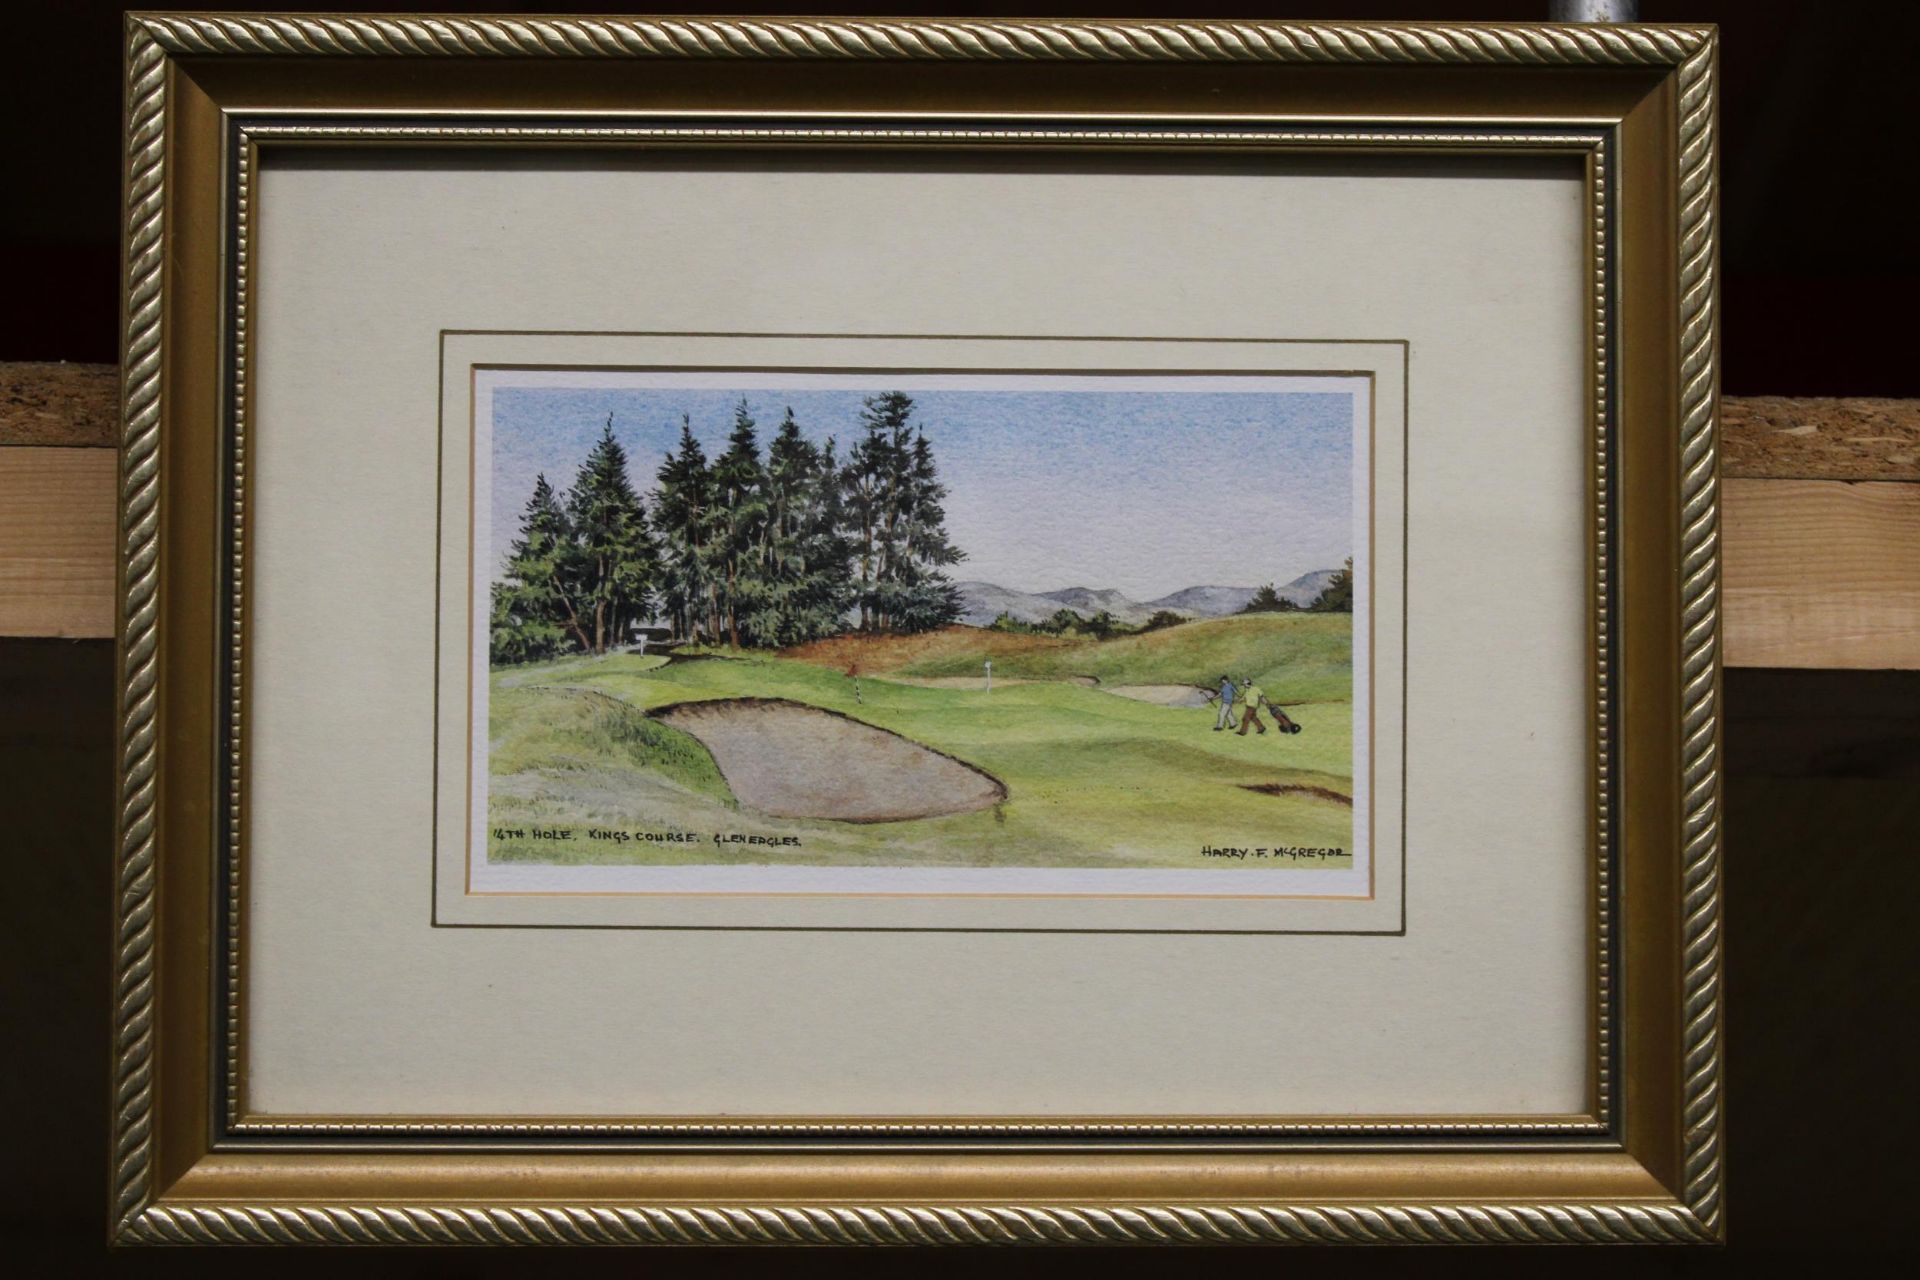 THREE FRAMED PRINTS OF GOLF COURSES TO INCLUDE, GLENEAGLES, ROYAL TROON AND MUIRFIELD - Image 4 of 6